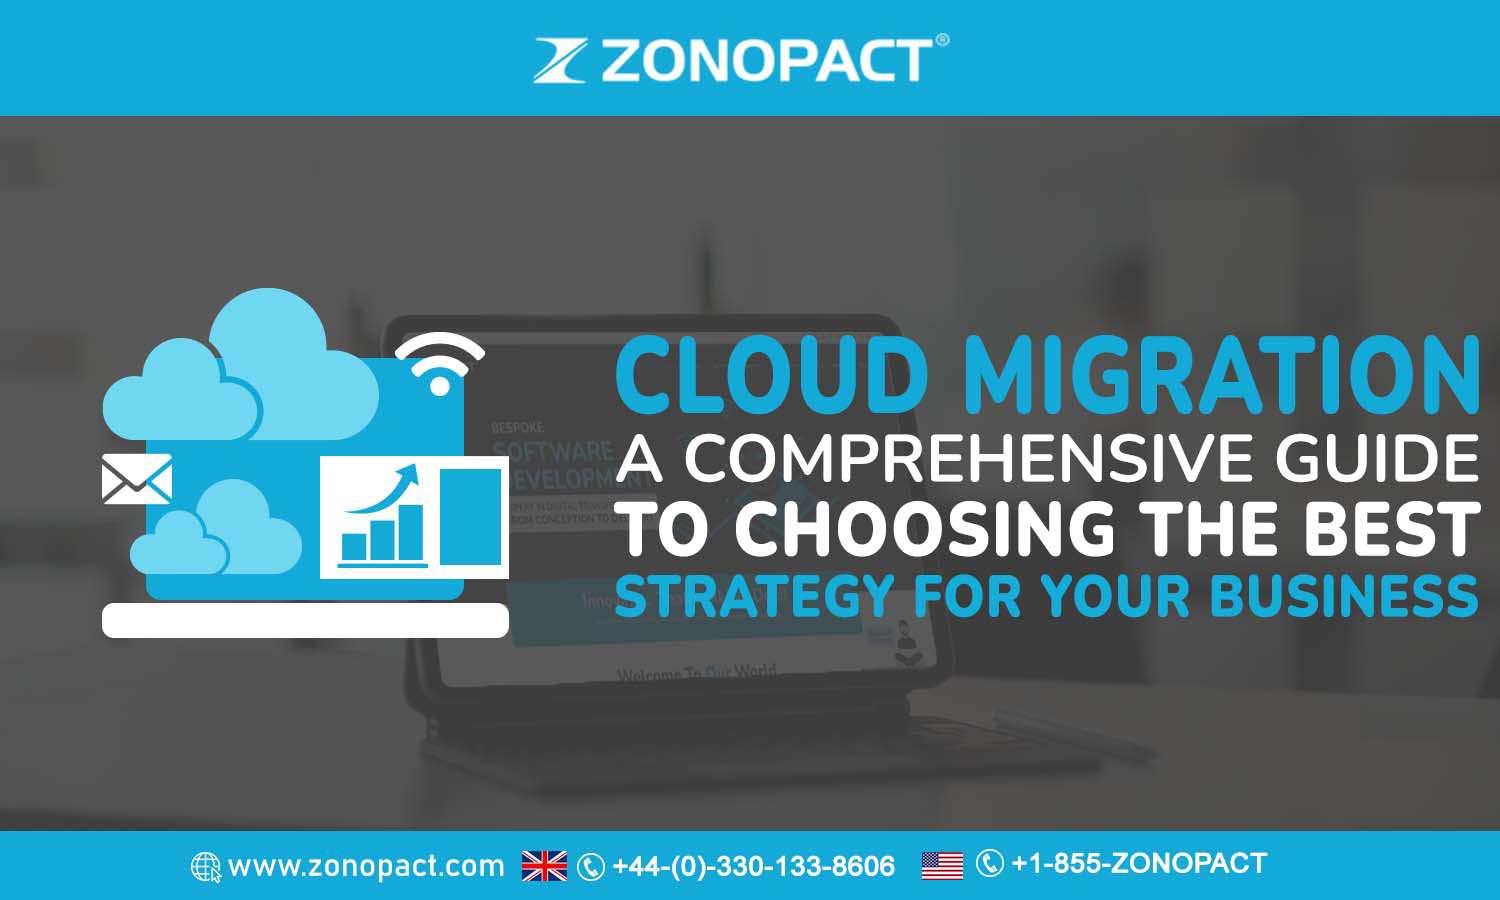 Cloud Migration A Comprehensive Guide to Choosing the Best Strategy for Your Business (1)